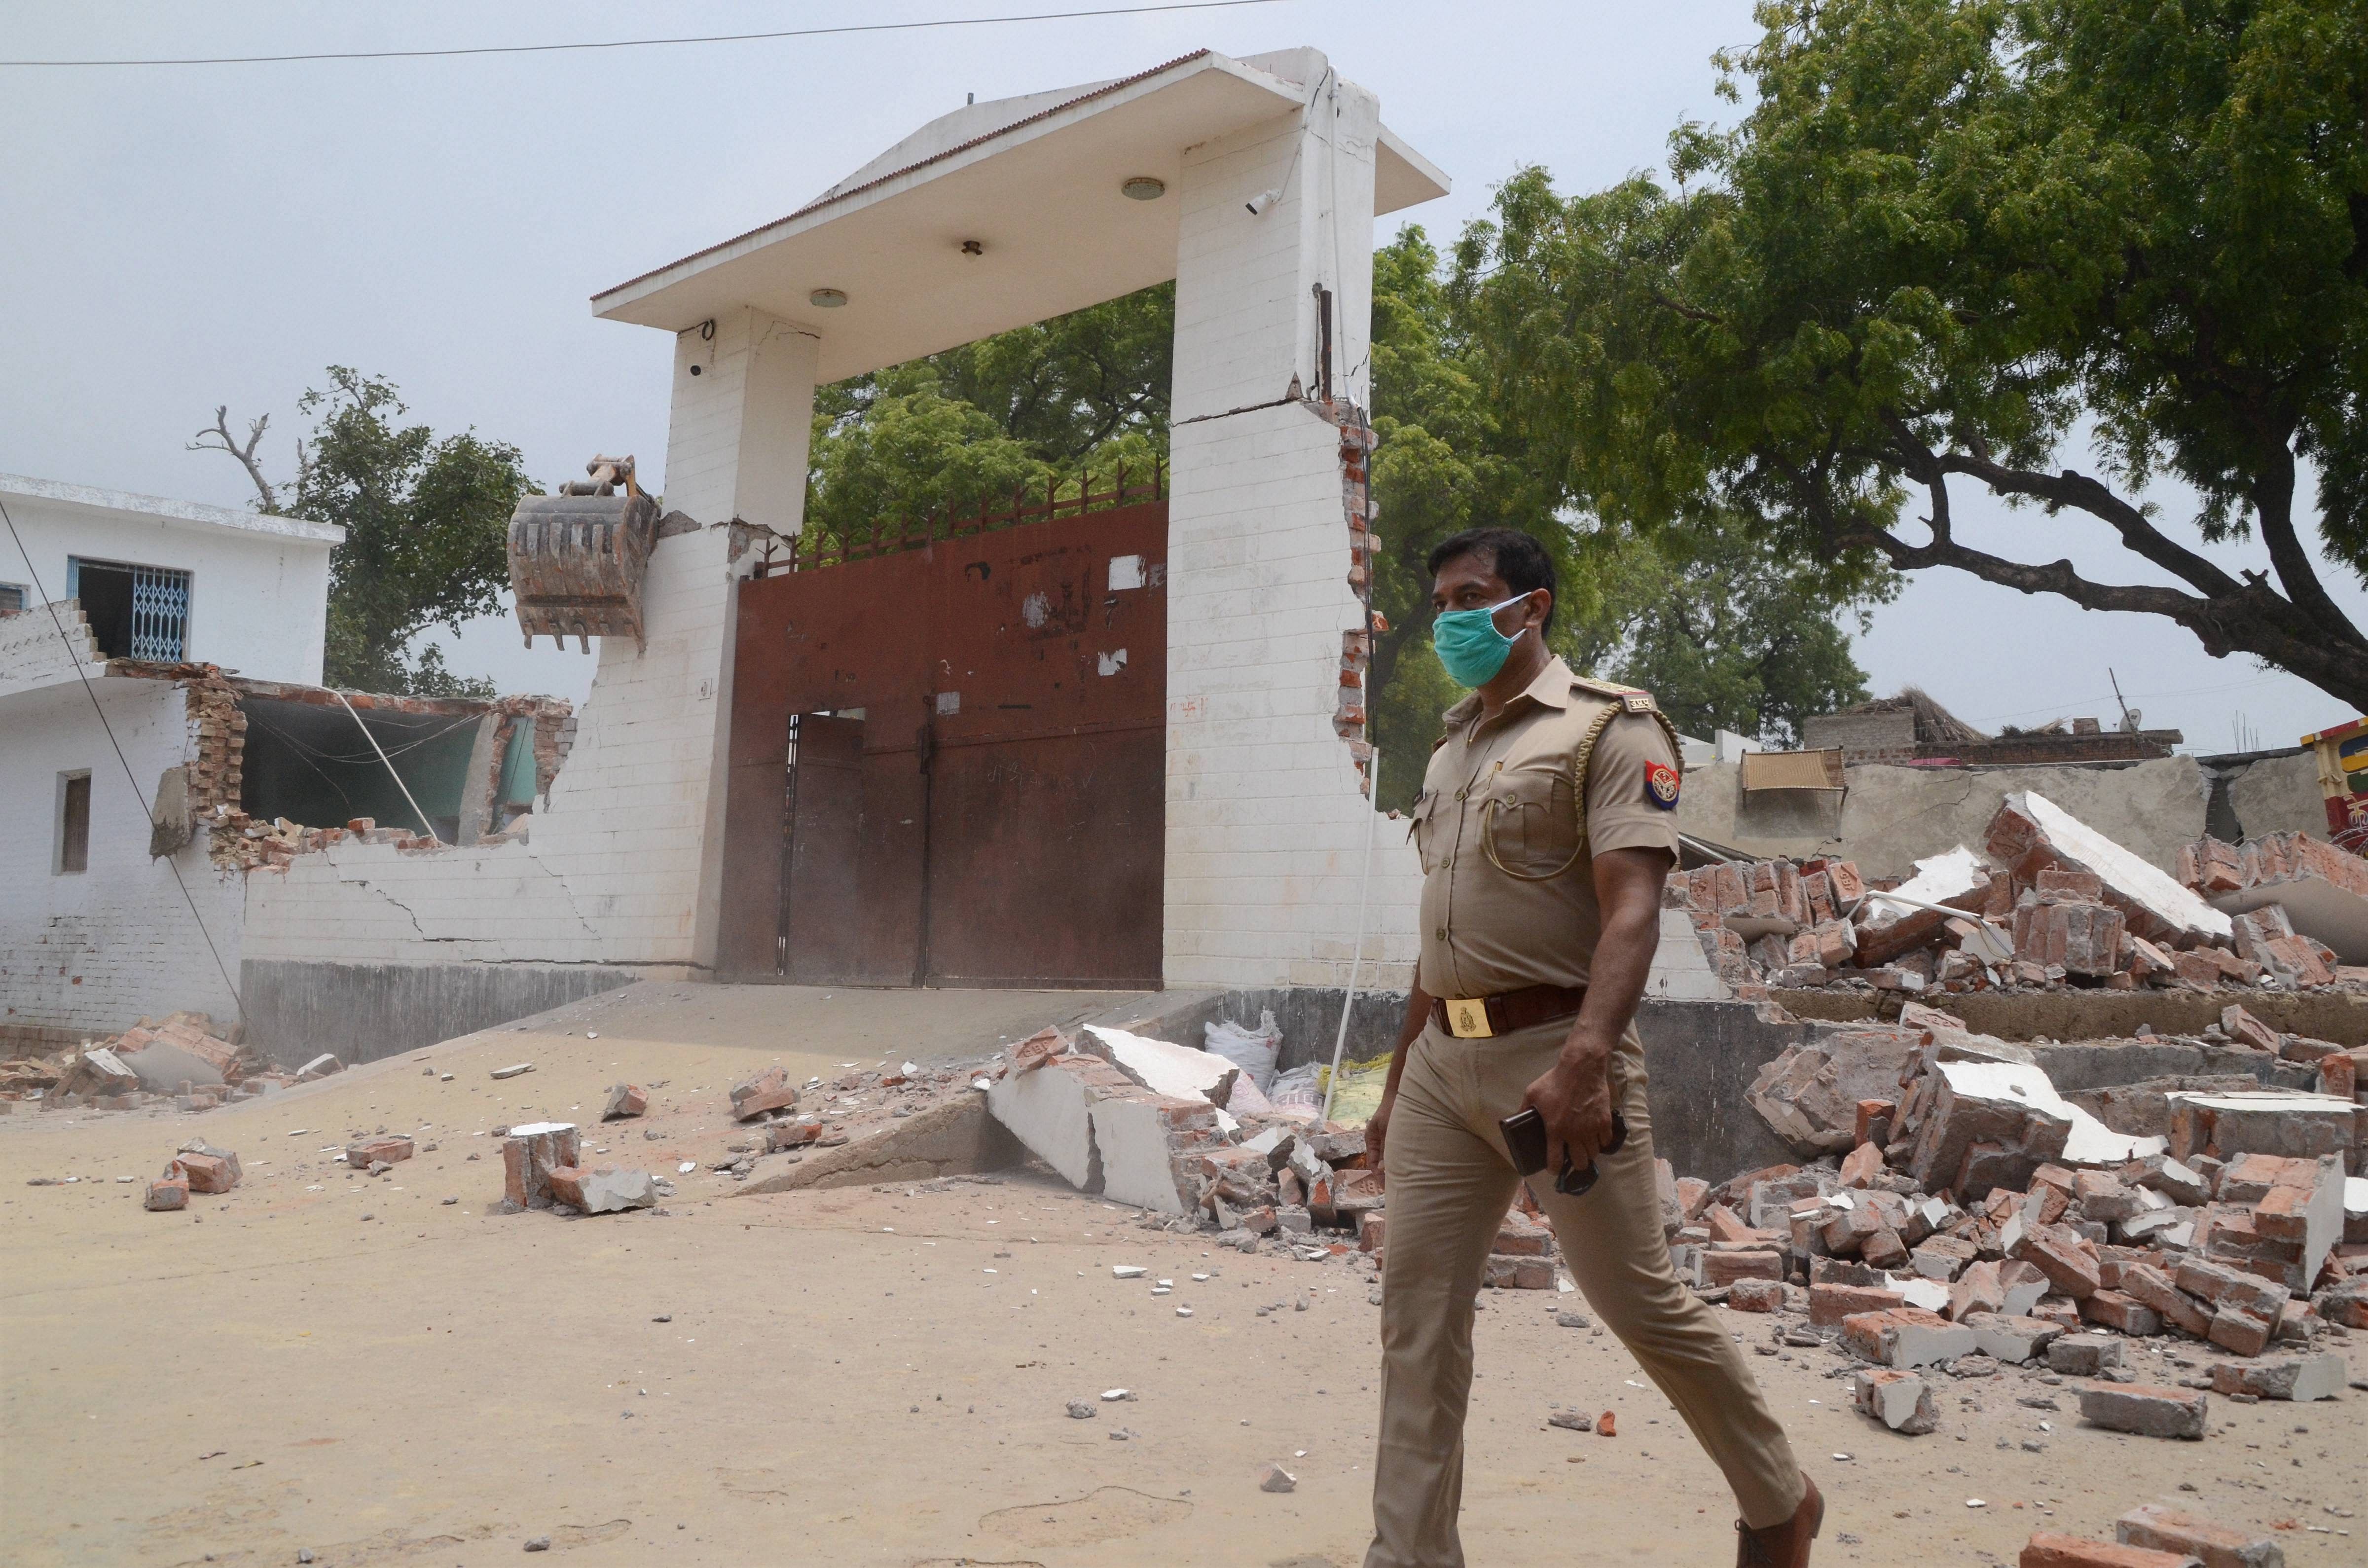 Debris lie on the ground following the demolition of the residence of criminal Vikay Dubey, after an encounter in Bikaru village where 8 police personnel lost their lives, in Kanpur, Saturday, July 4, 2020. The encounter took place when the police team was approaching to arrest Vikas Dubey, a history-sheeter facing 60 criminal cases, on the intervening night of Thursday and Friday. (PTI Photo)